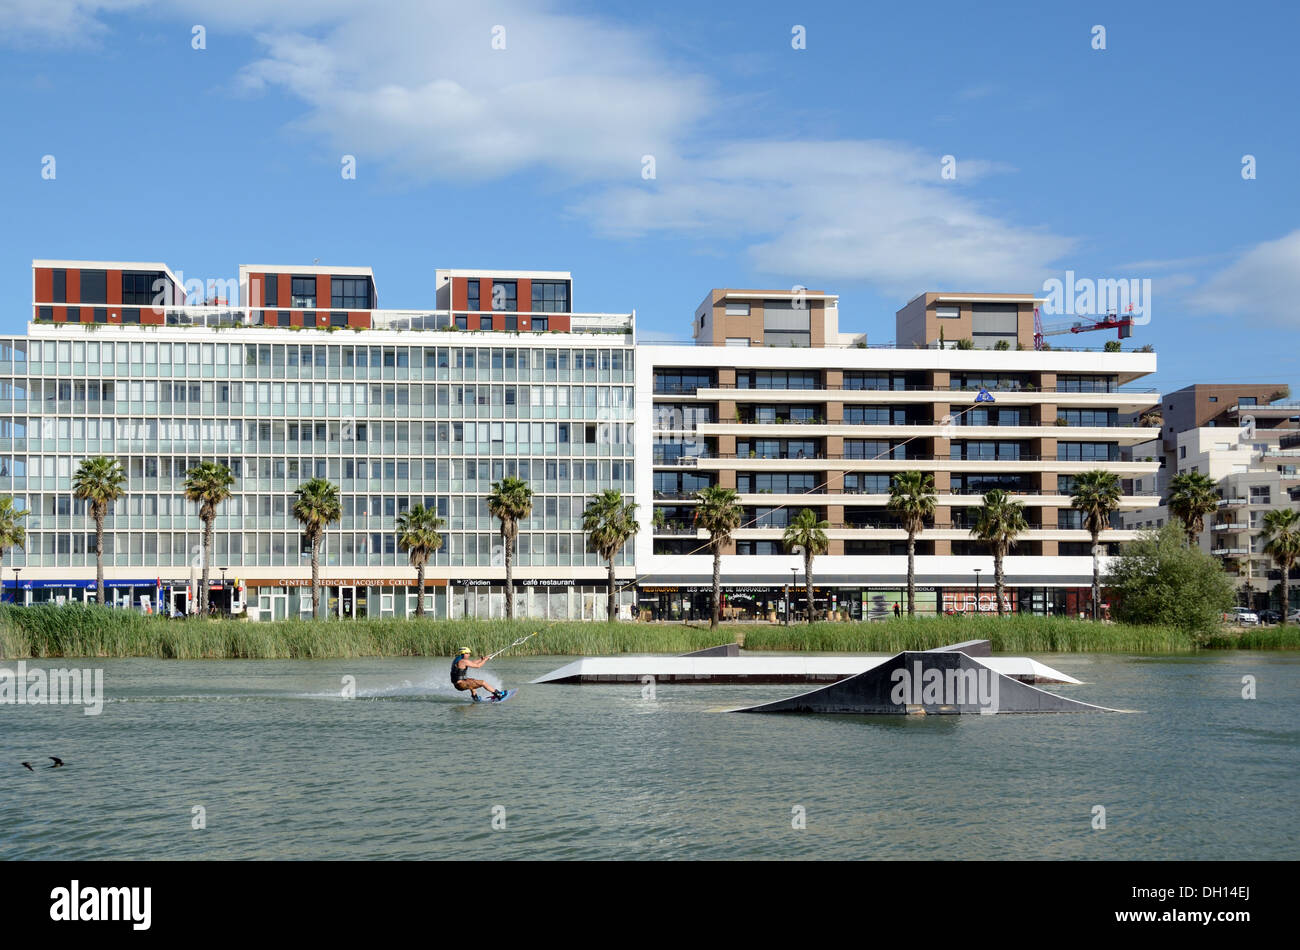 Water Skiing on Bassin Jacques Coeur & Modern Apartments in the Parc Marianne District, a New District or Suburb of Montpellier France Stock Photo